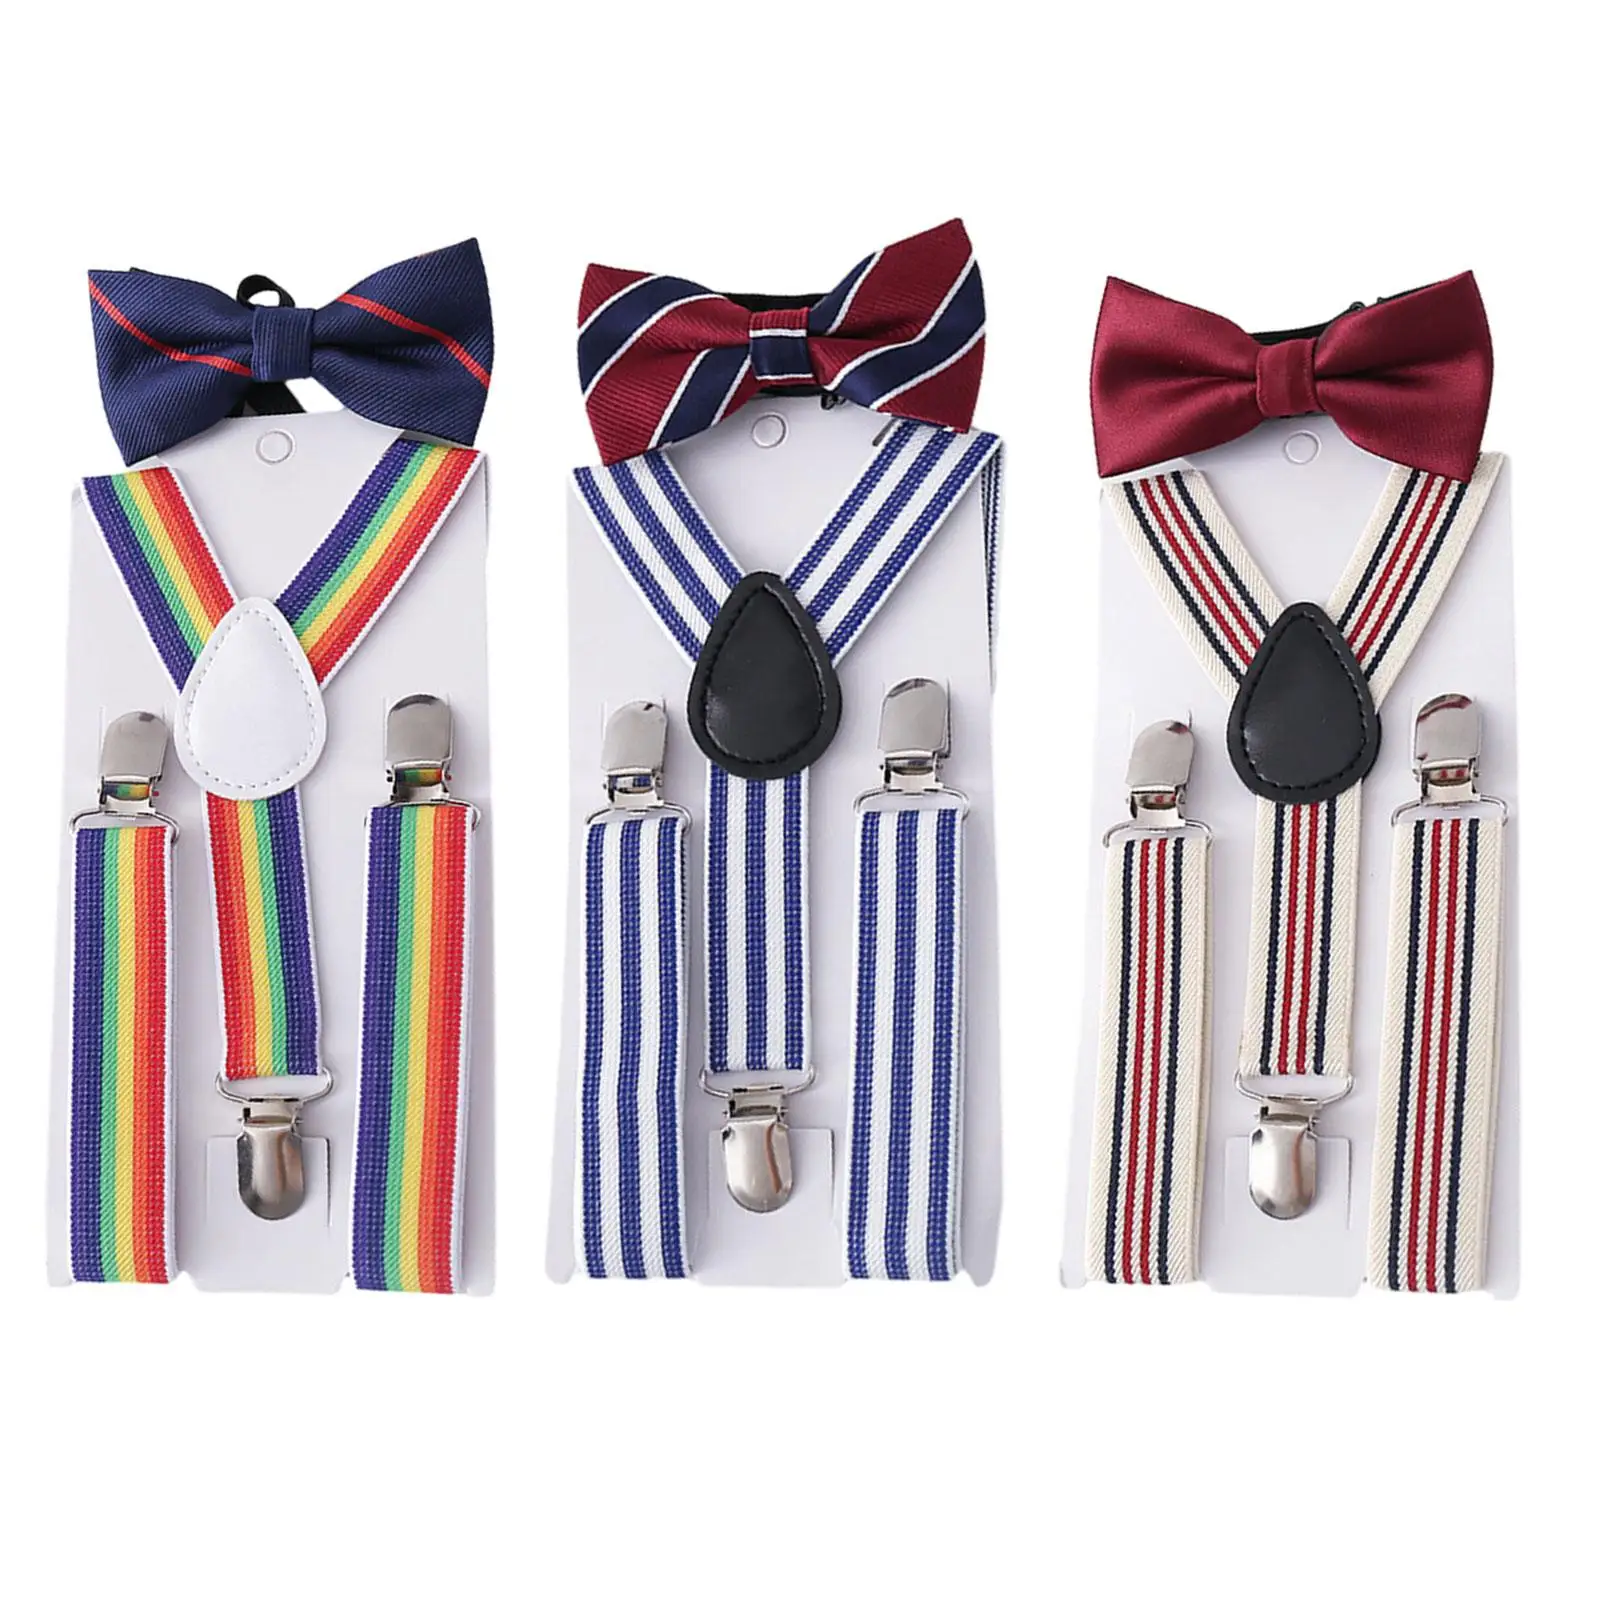 Kids Suspender Bow Tie Set Clothes Accessories Y Shape Adjustable Braces for Party Dance Costume Formal Wear Halloween Cosplay